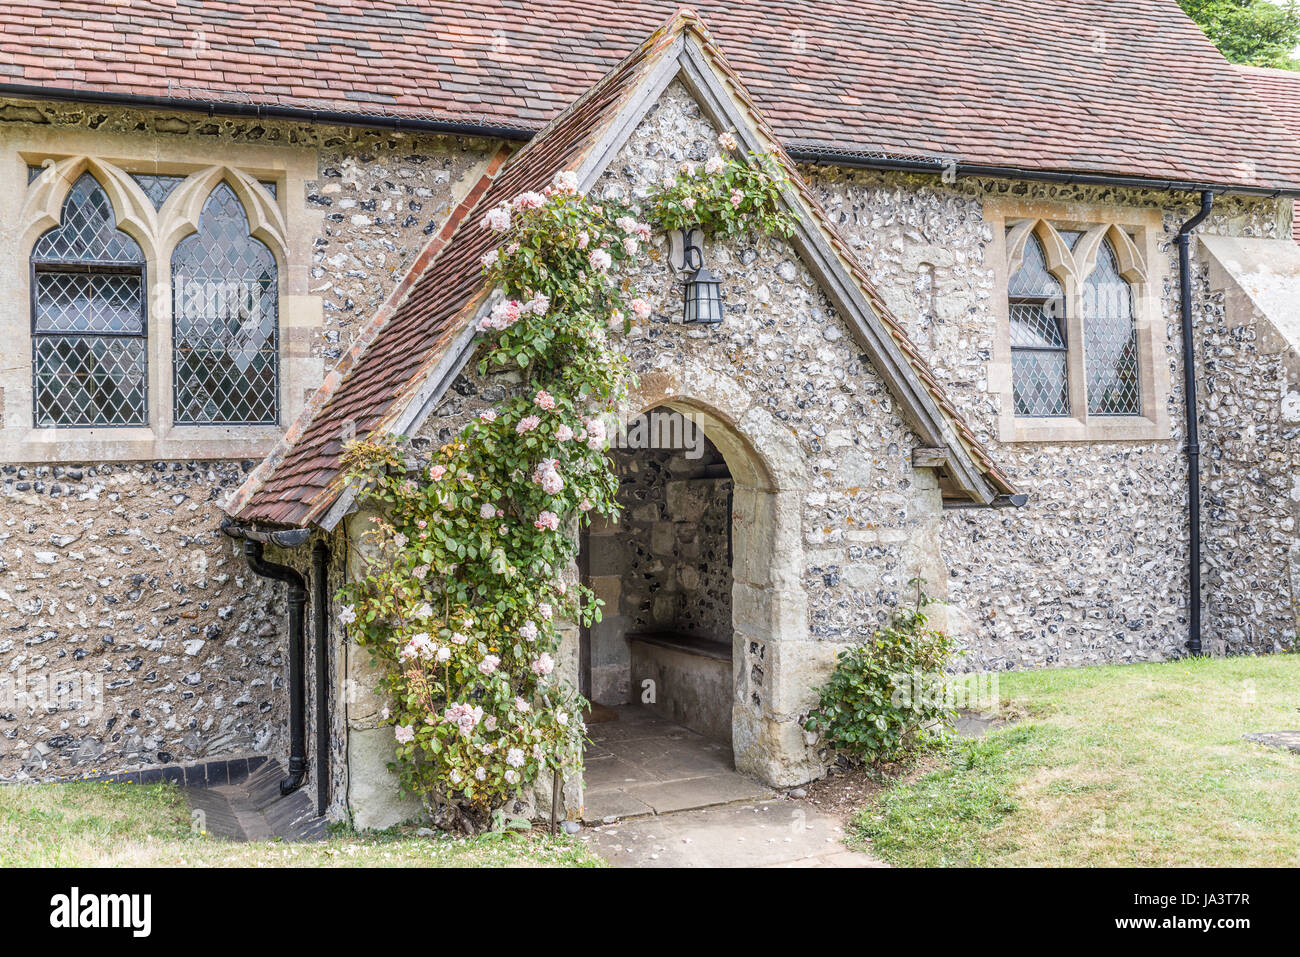 church, goal, passage, gate, archgway, gantry, entrance, roses, ruins, england, Stock Photo